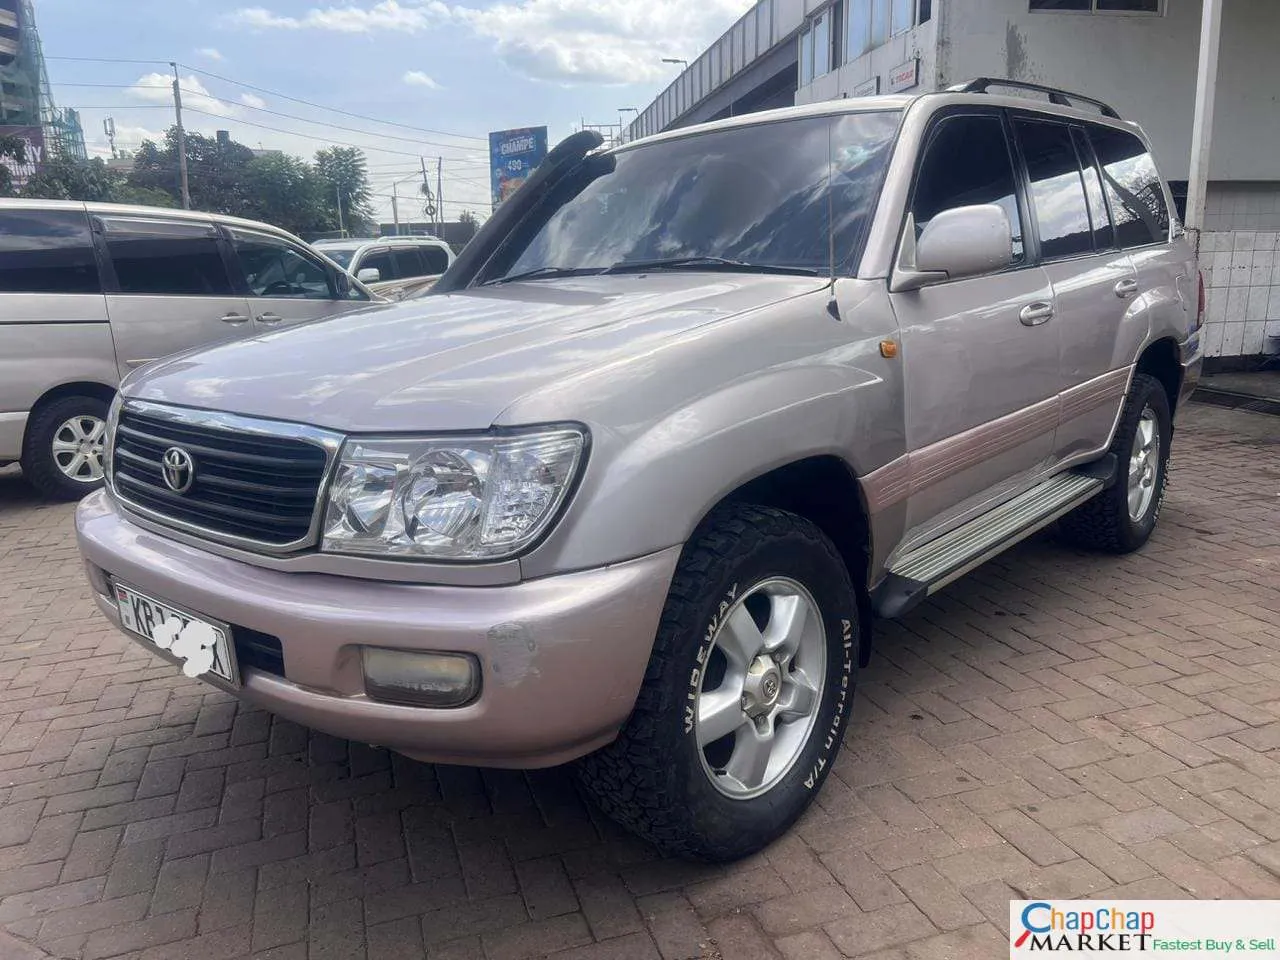 Toyota Land Cruiser 100 series AMAZON 4.2 DIESEL 100 SERIES You Pay 30% Deposit Trade in Ok EXCLUSIVE hire purchase installments Kenya